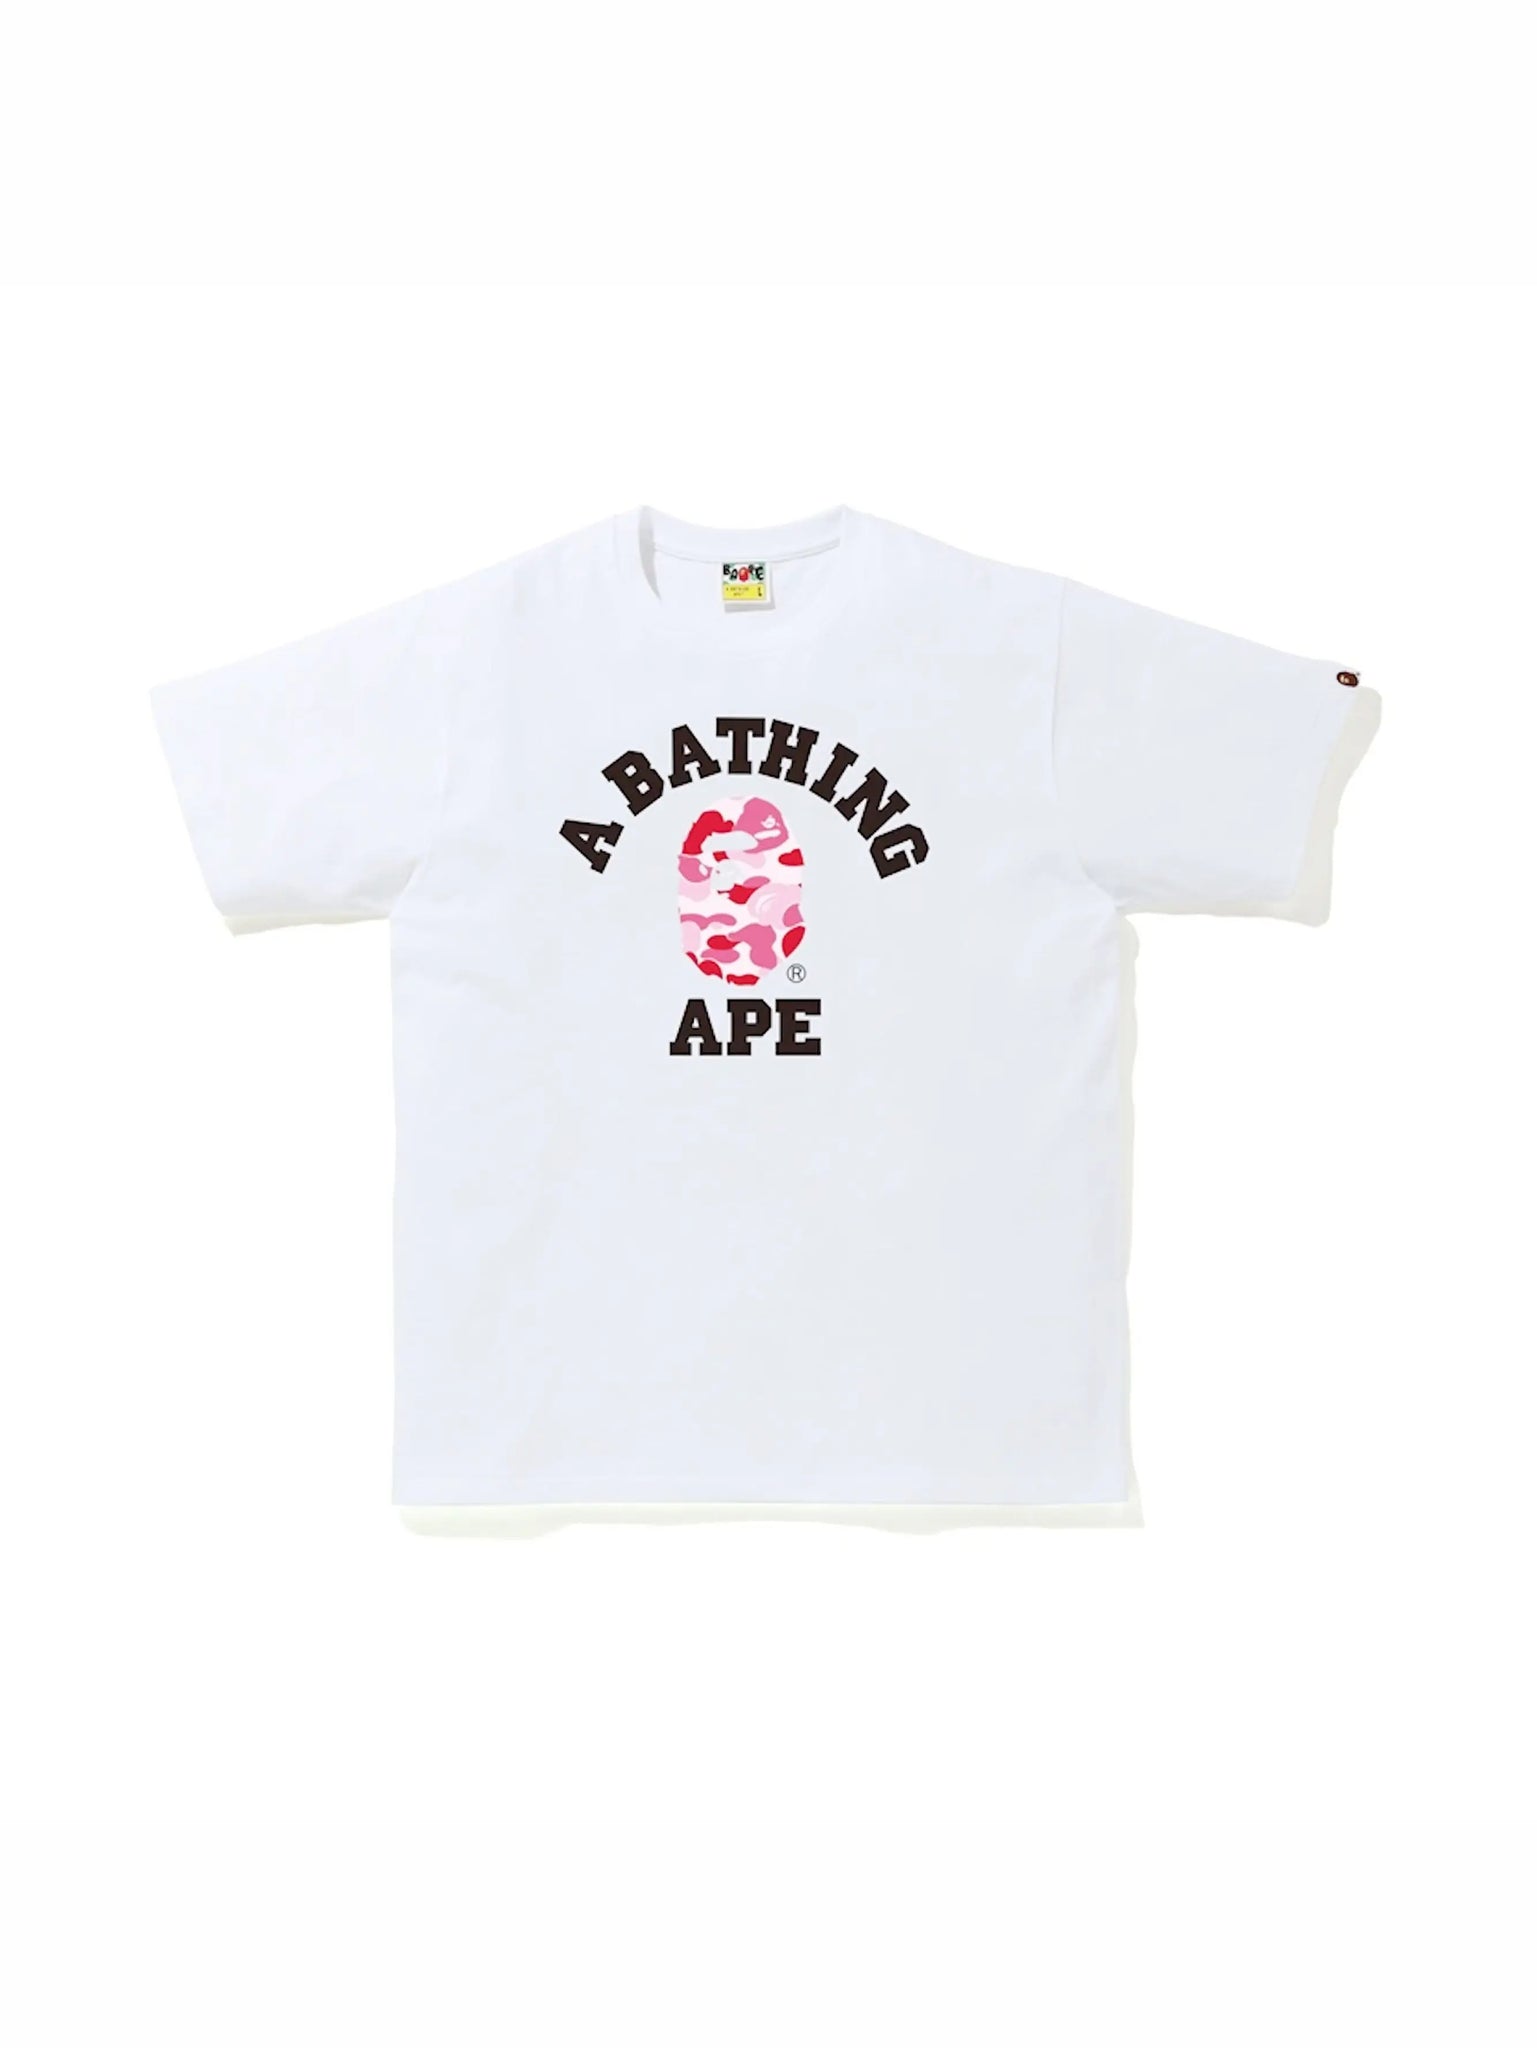 A Bathing Ape ABC Camo College Tee (SS23) White/Pink in Melbourne, Australia - Prior